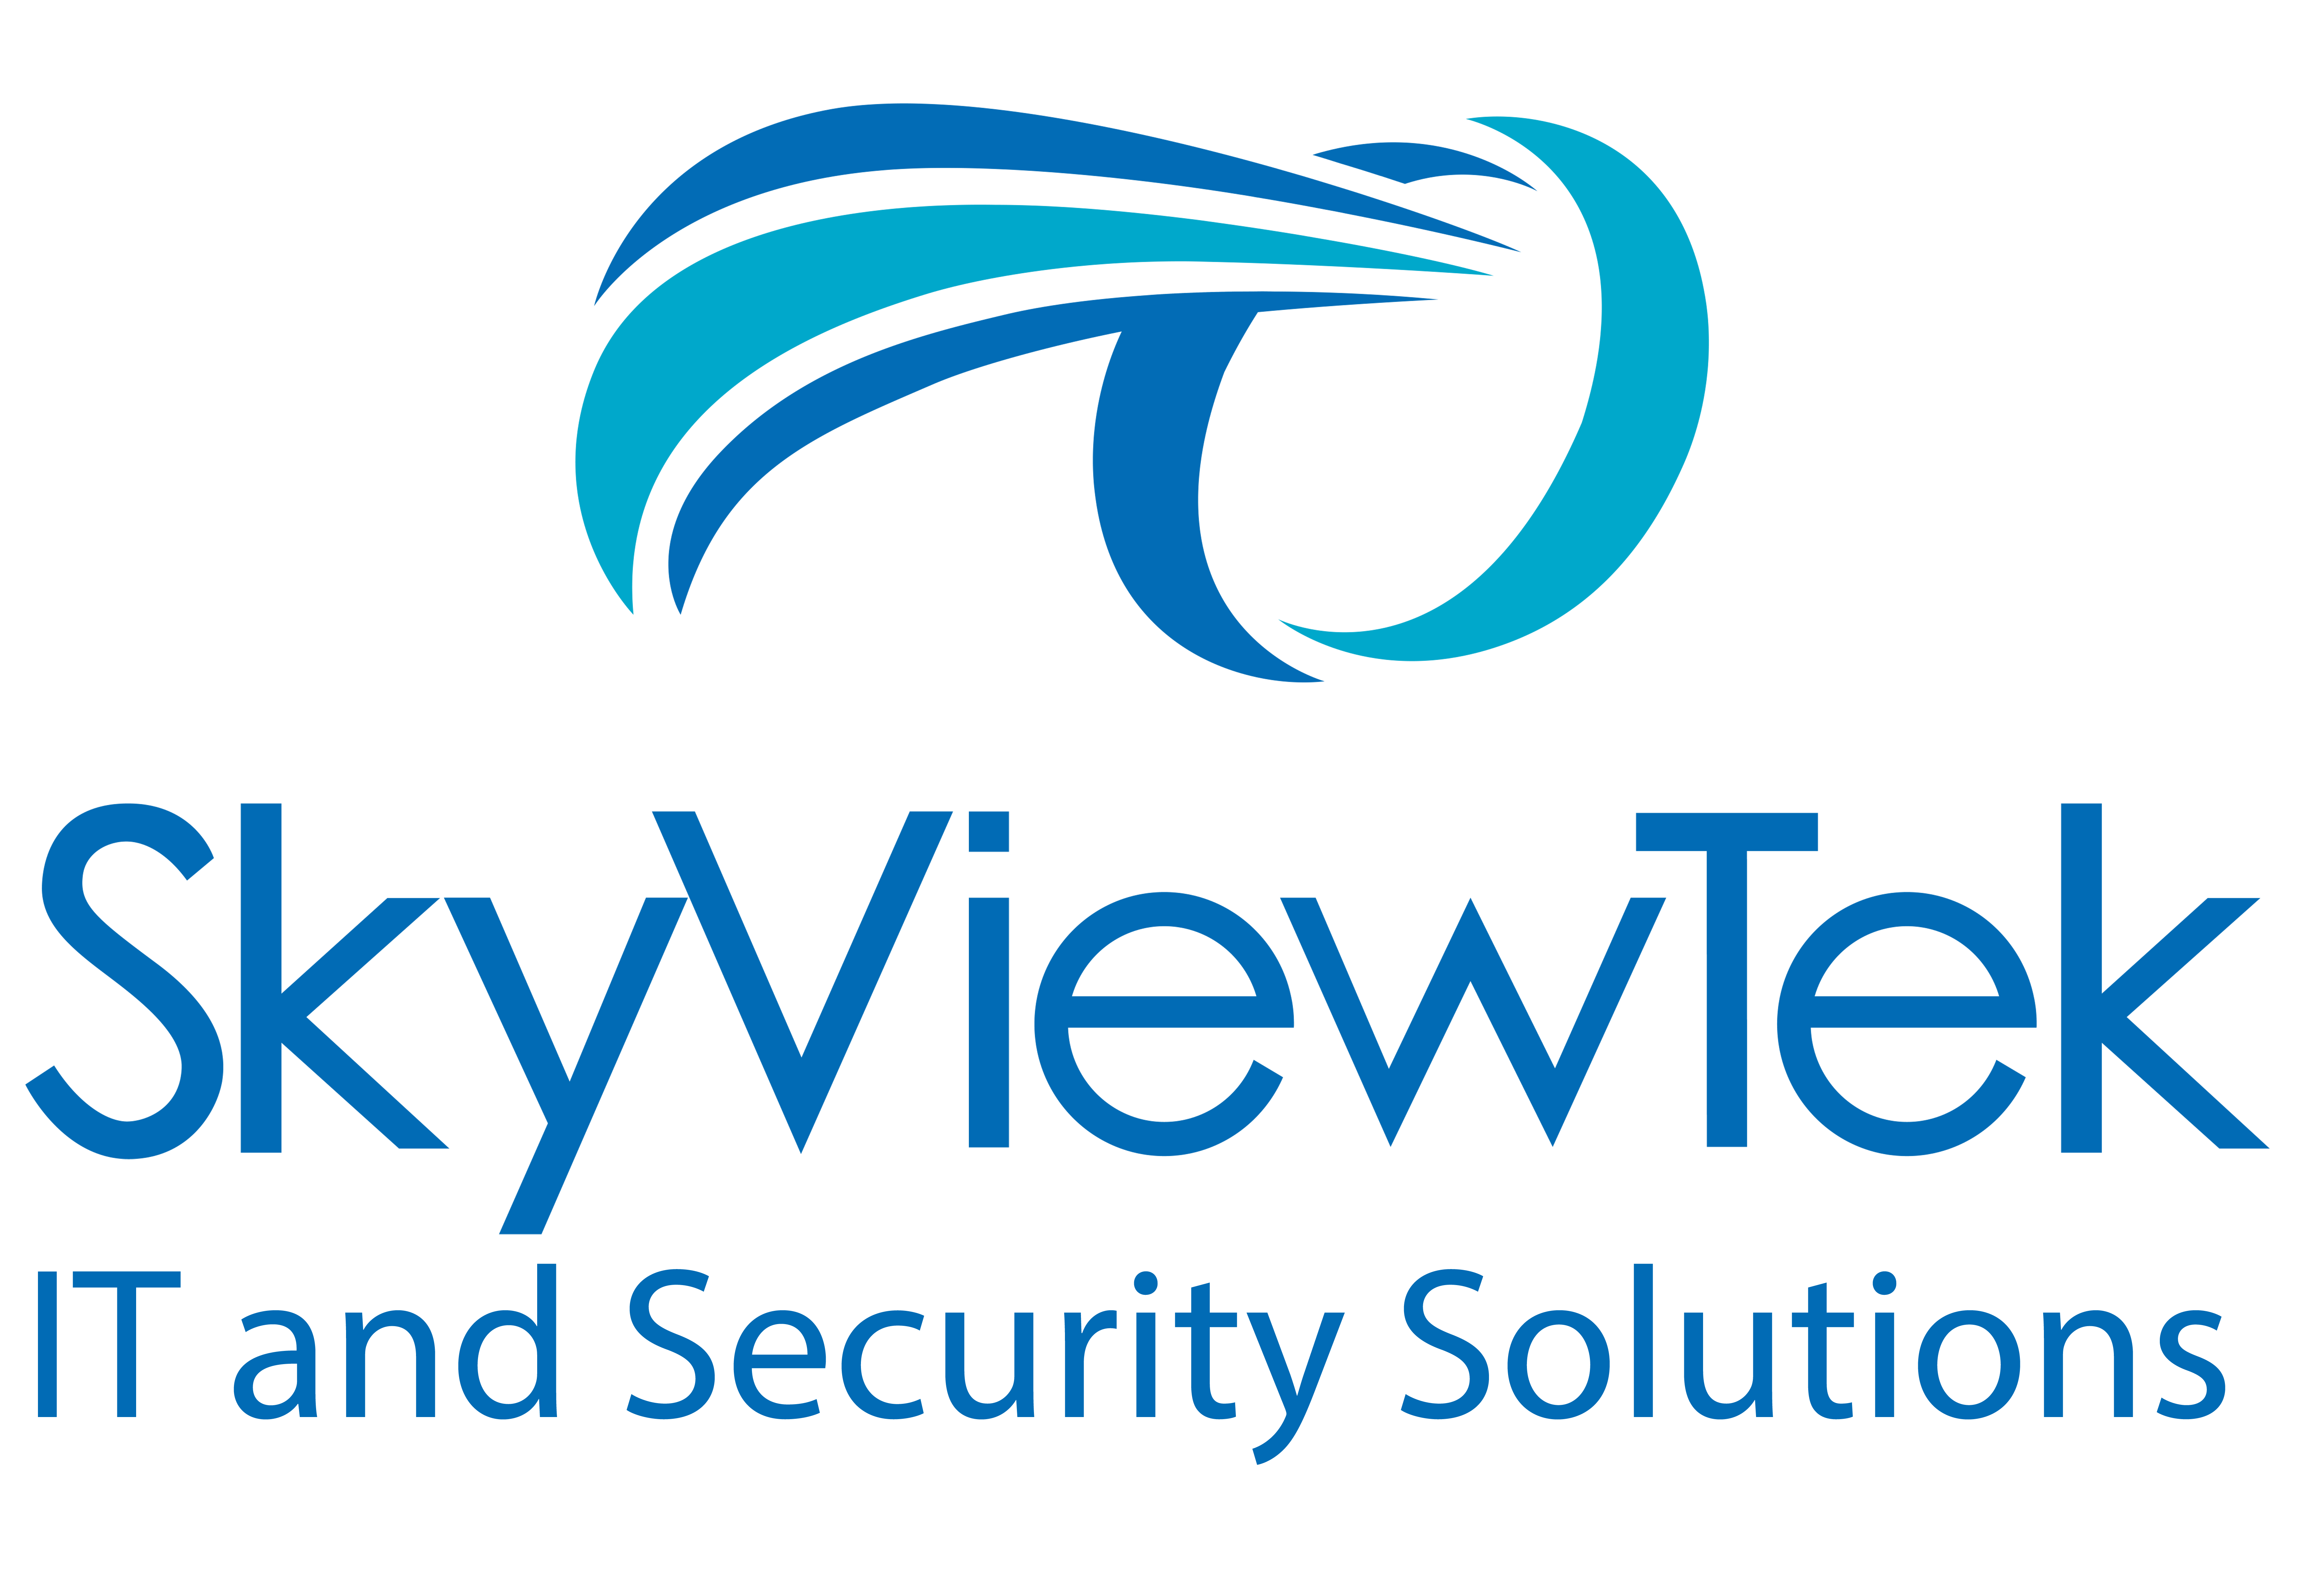 SkyViewTek IT and Security Solutions